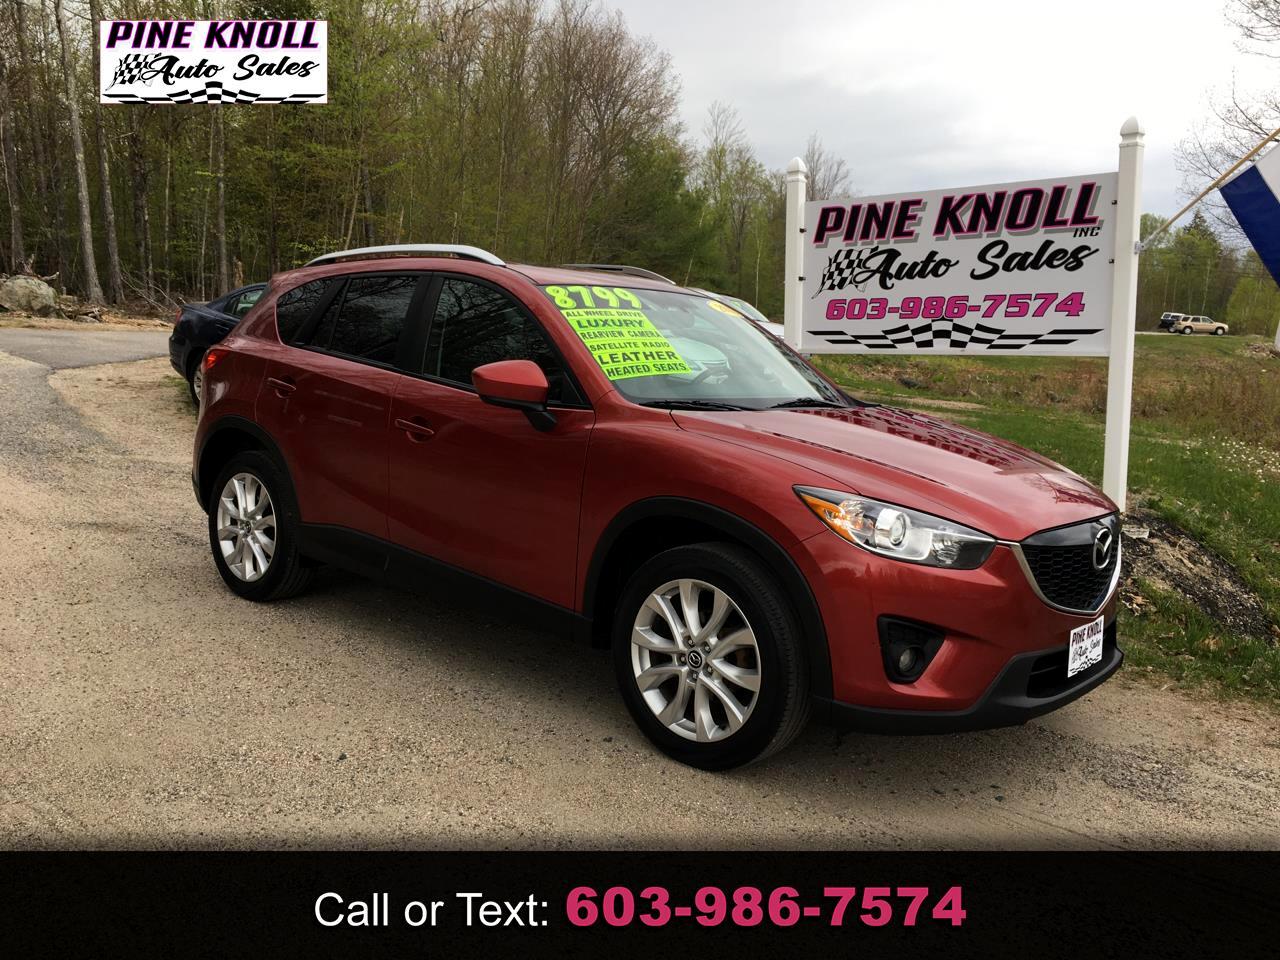 Used 2013 Mazda Cx 5 Grand Touring Awd For Sale In Sanbornville Nh 03872 Pine Knoll Auto Sales